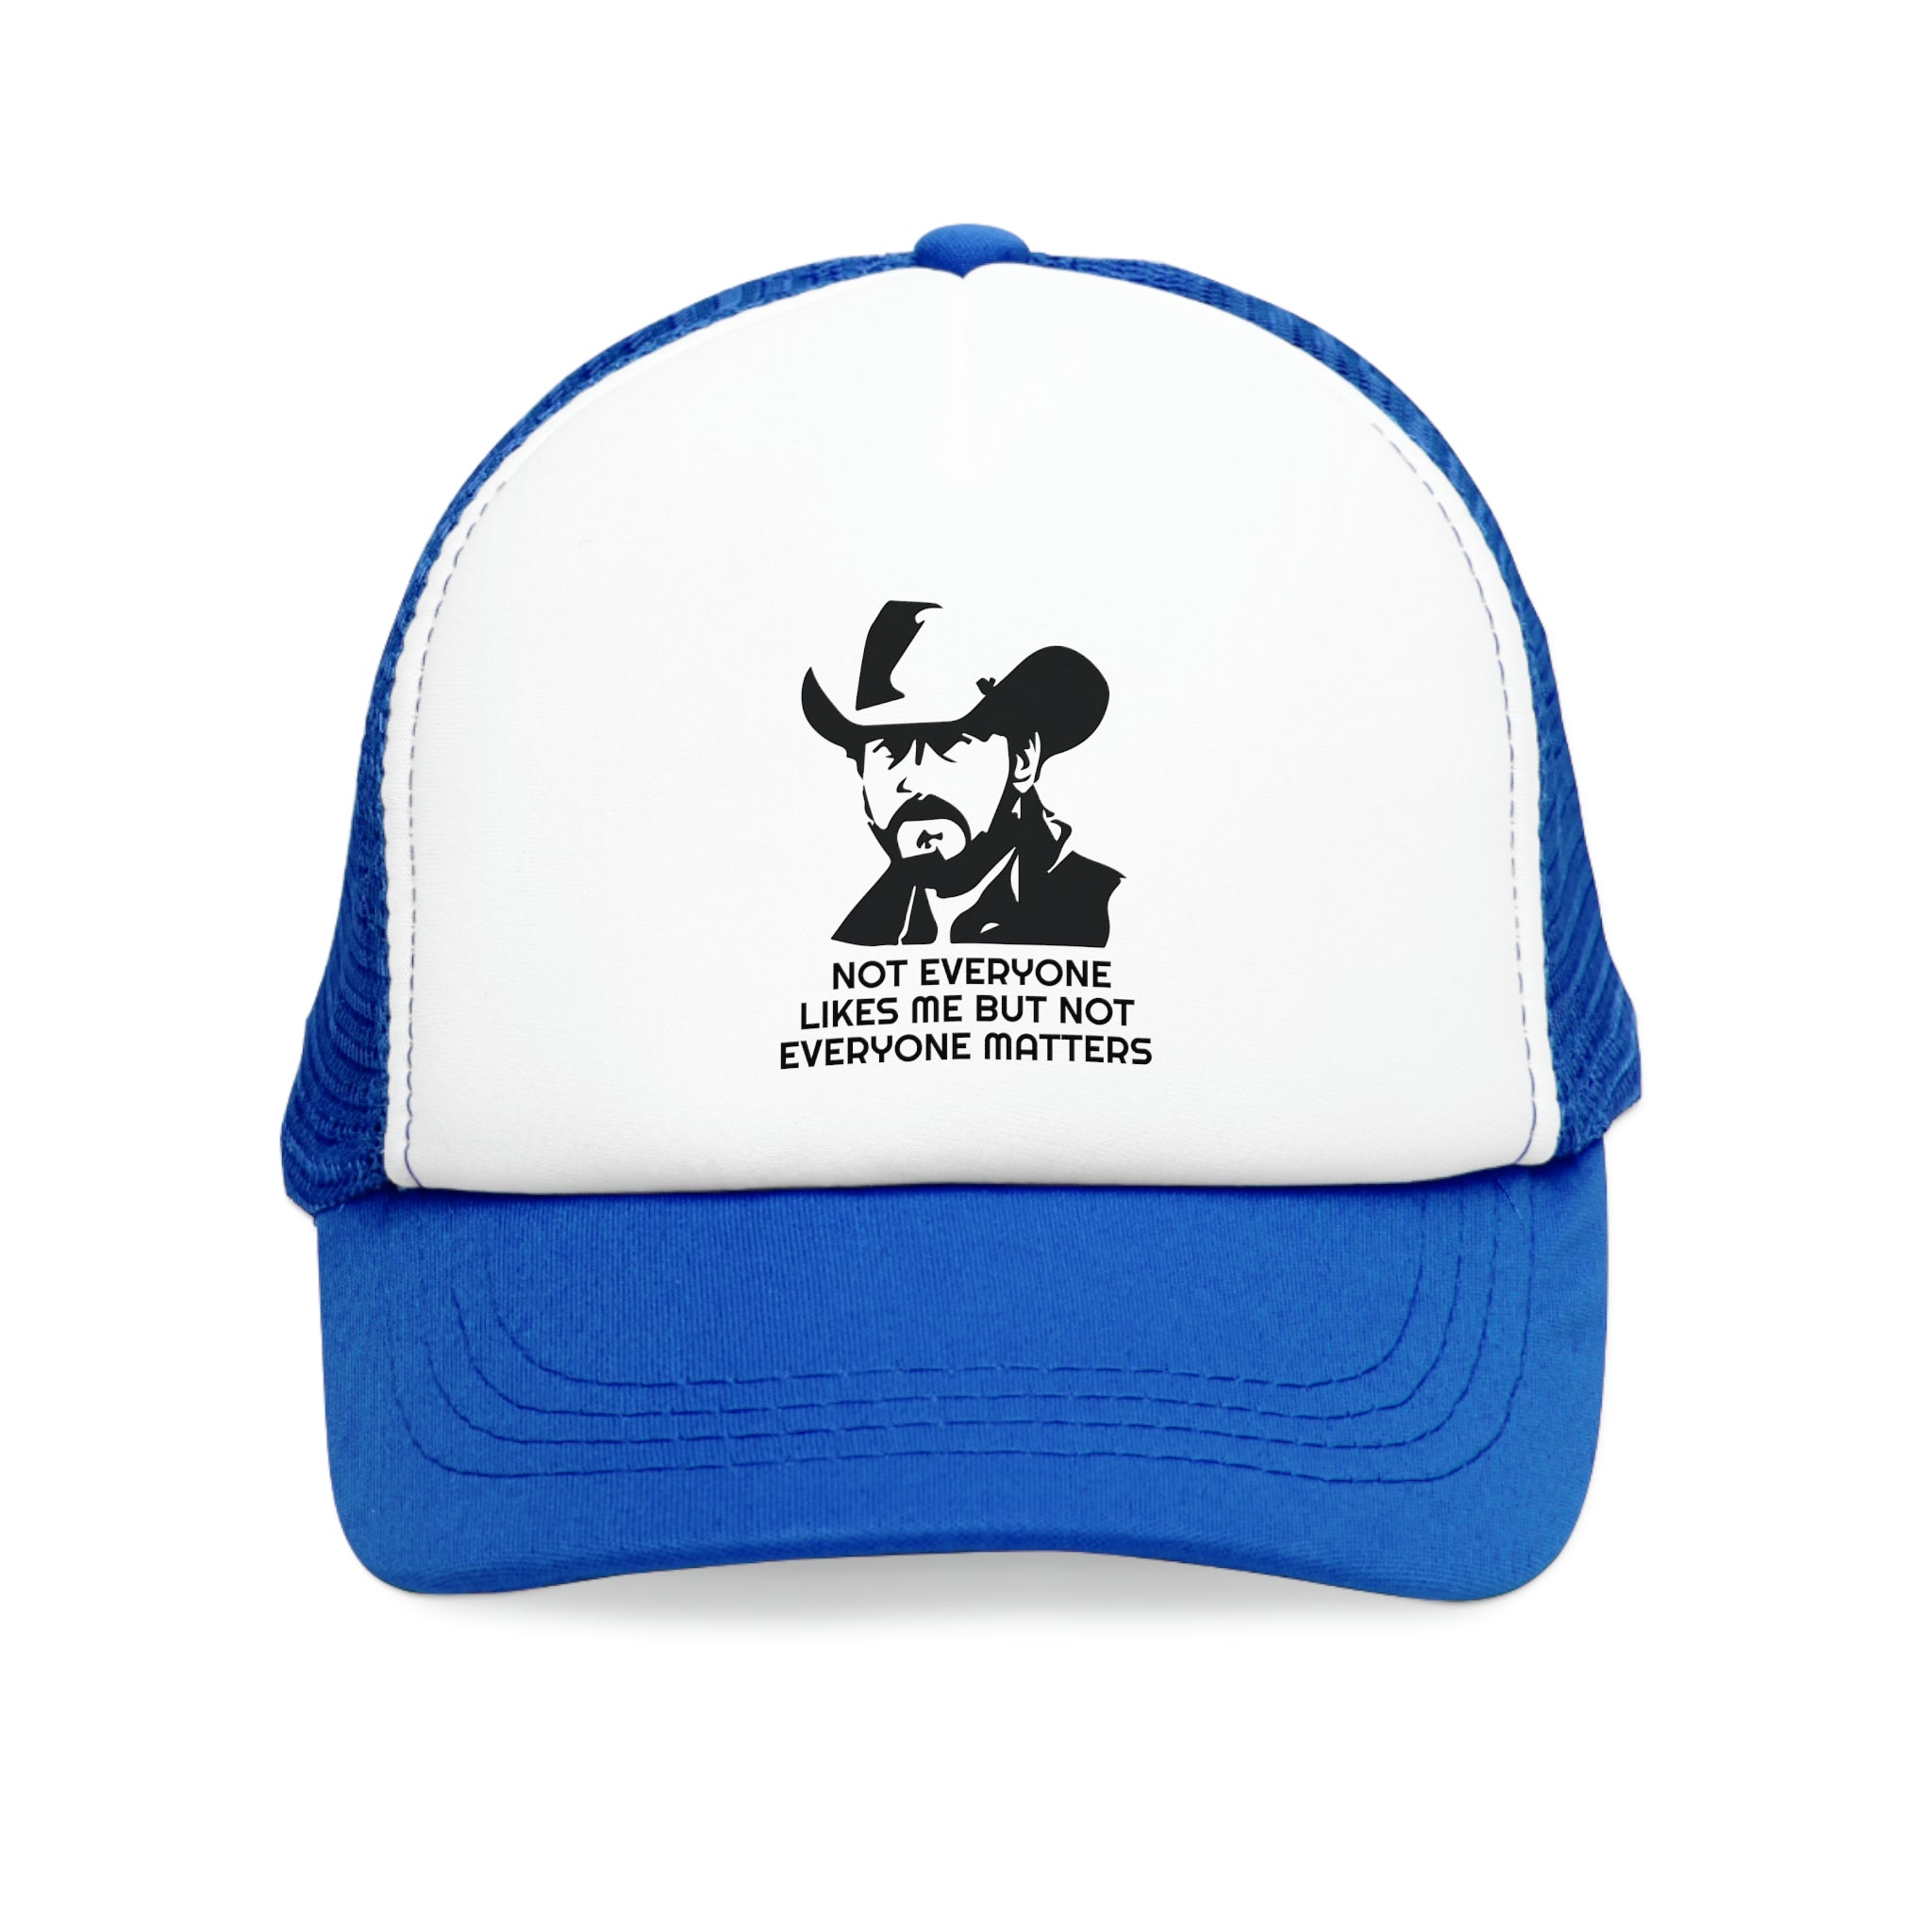 "Not Everyone likes me" Trucker Hat